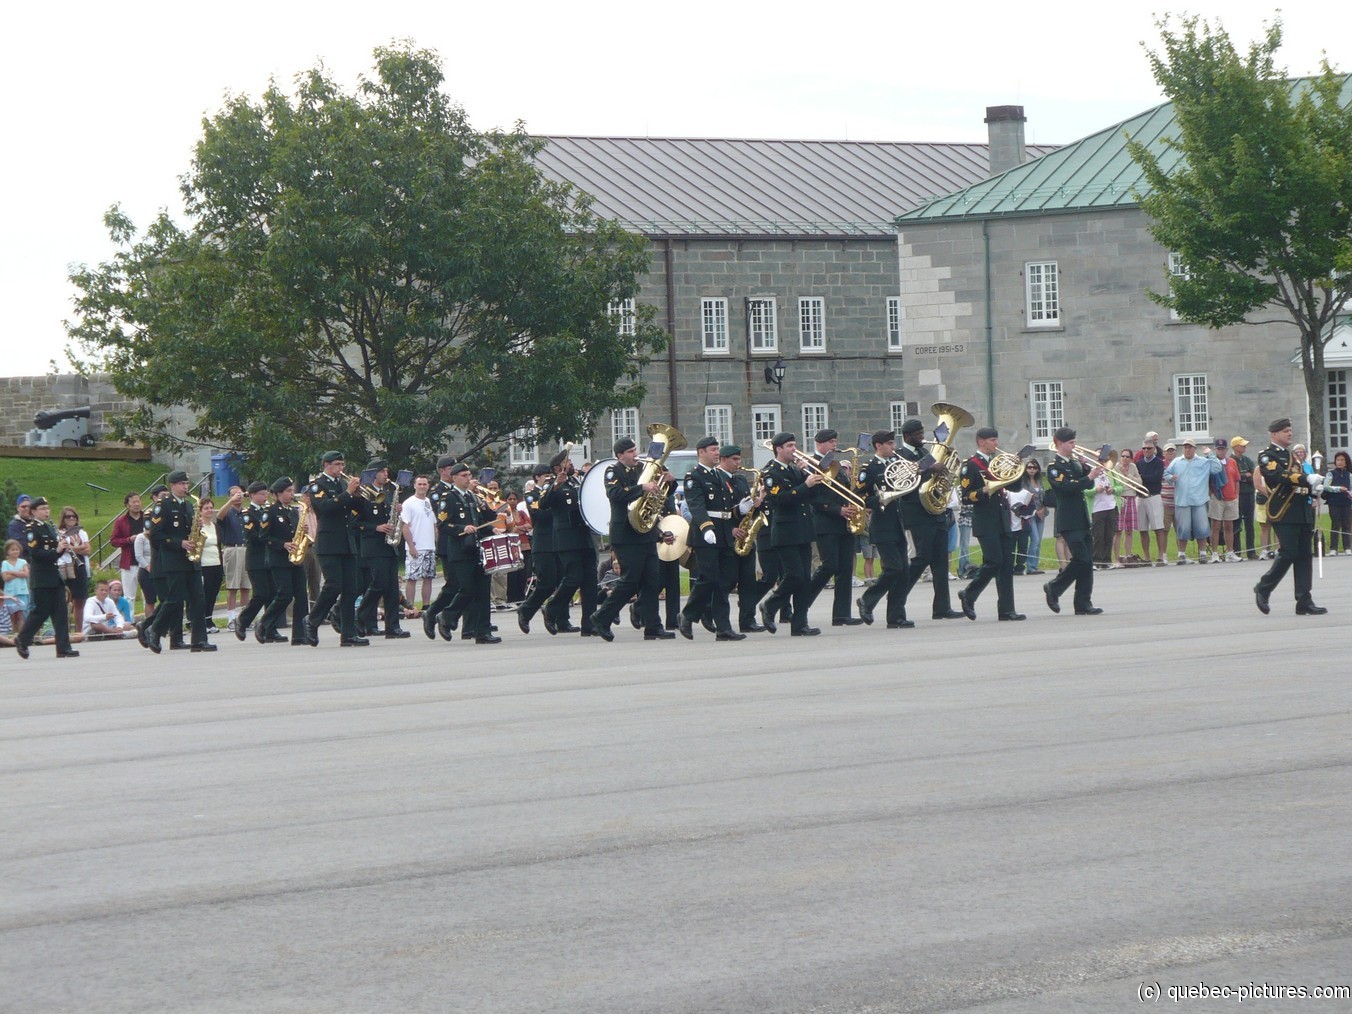 Marching band joins the Changing of the Guard show at La Citadel in Quebec.jpg
